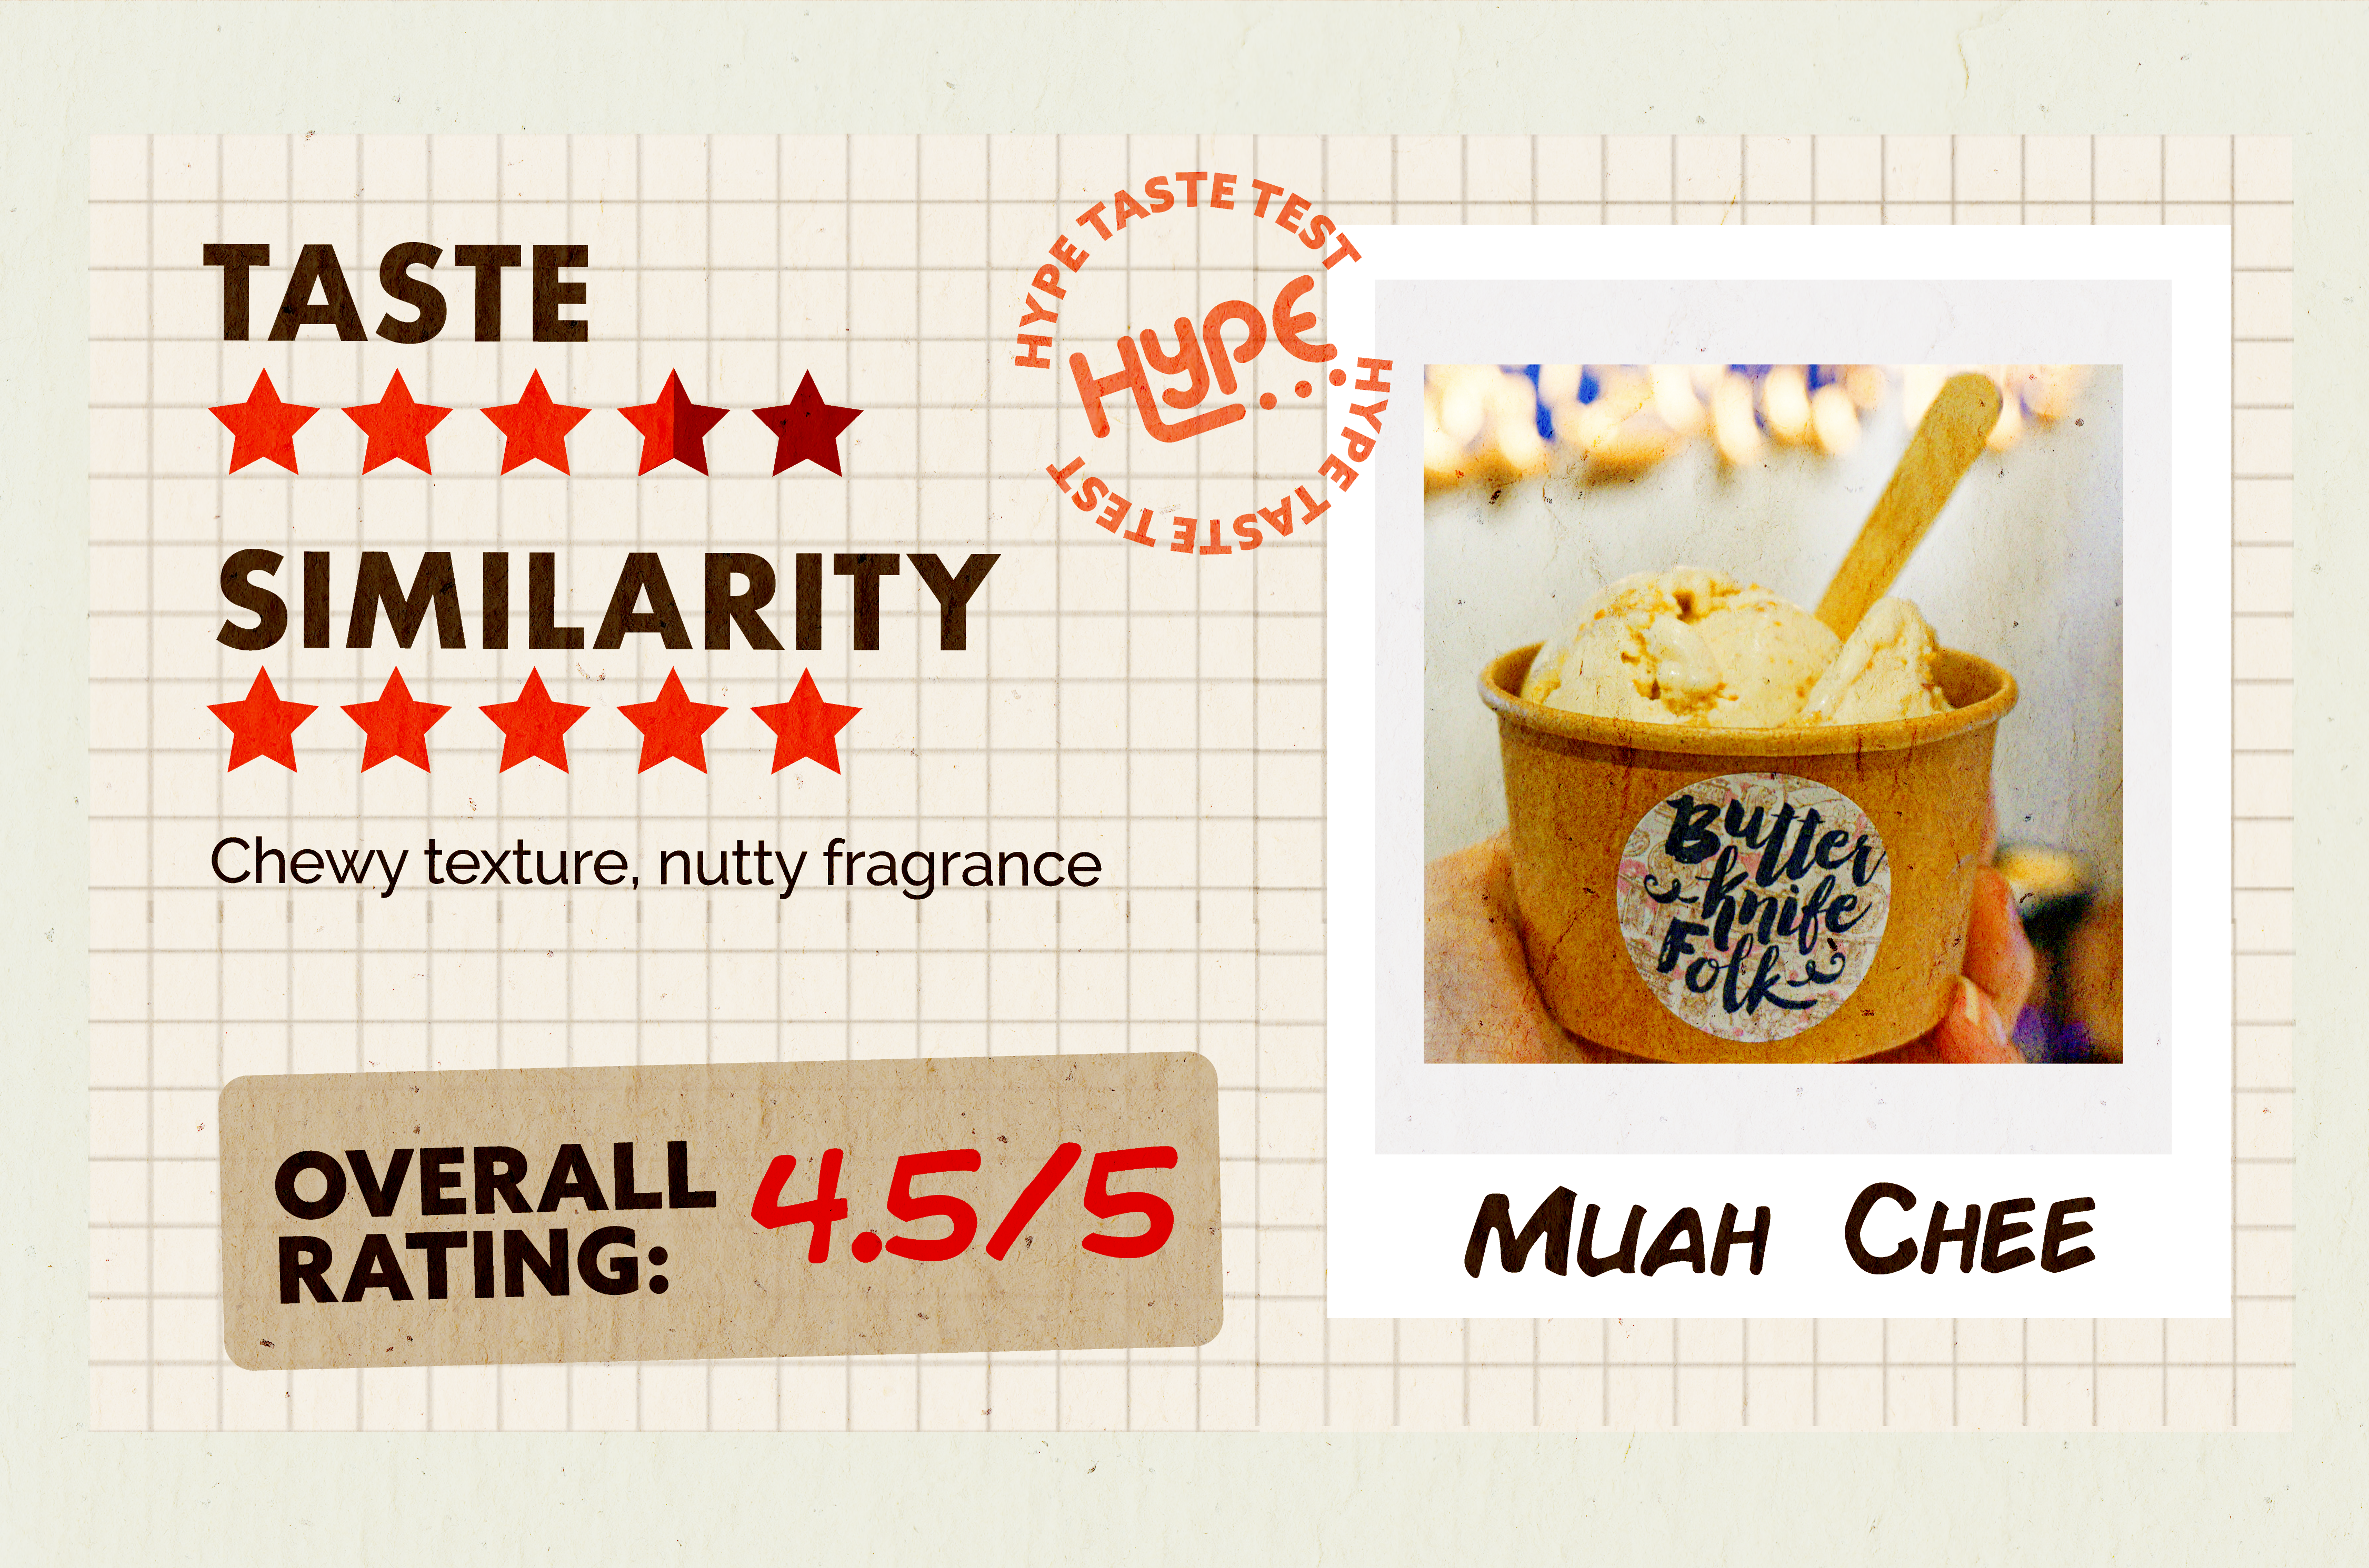 HYPE's rating for Muah Chee, 4.5/5